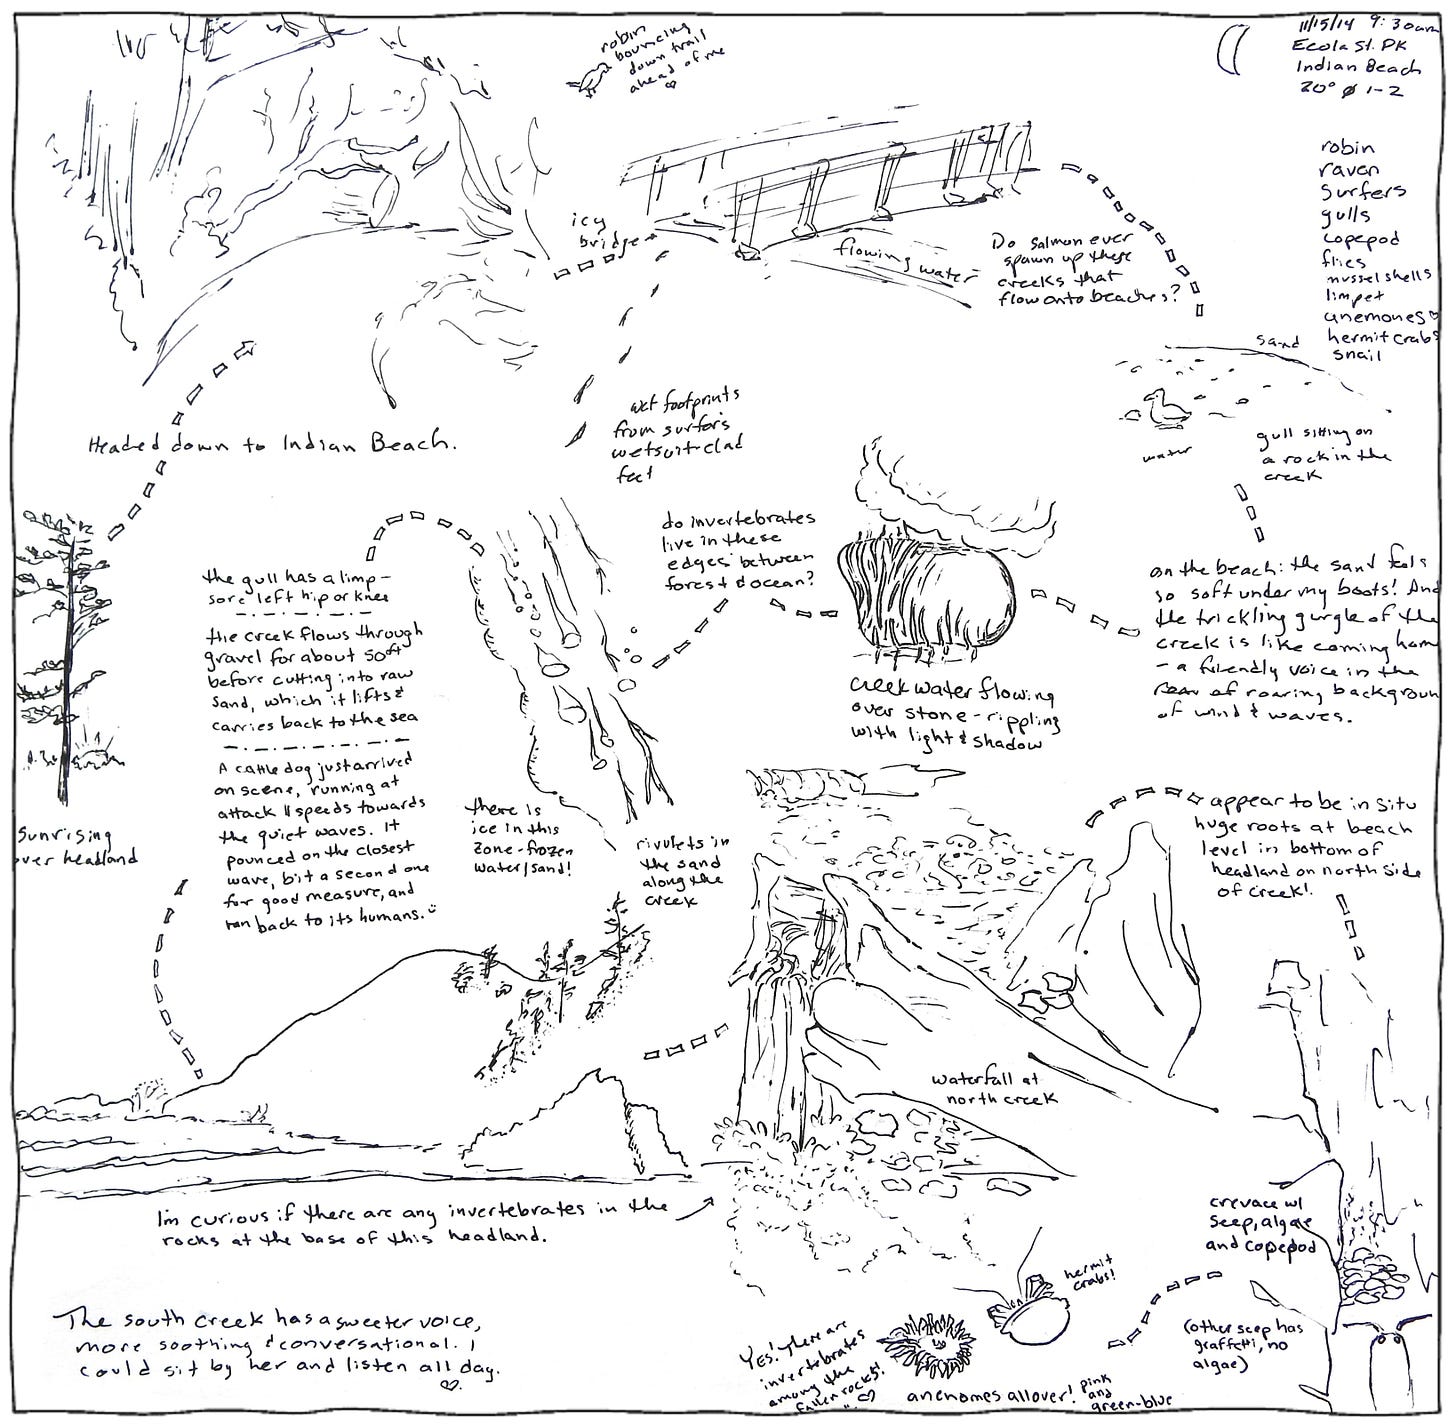 A page full of hand-drawn sketches connected by a dotted line.  Some of the sketches include a tree, a wooden bridge, a headland, and a sea anemone.